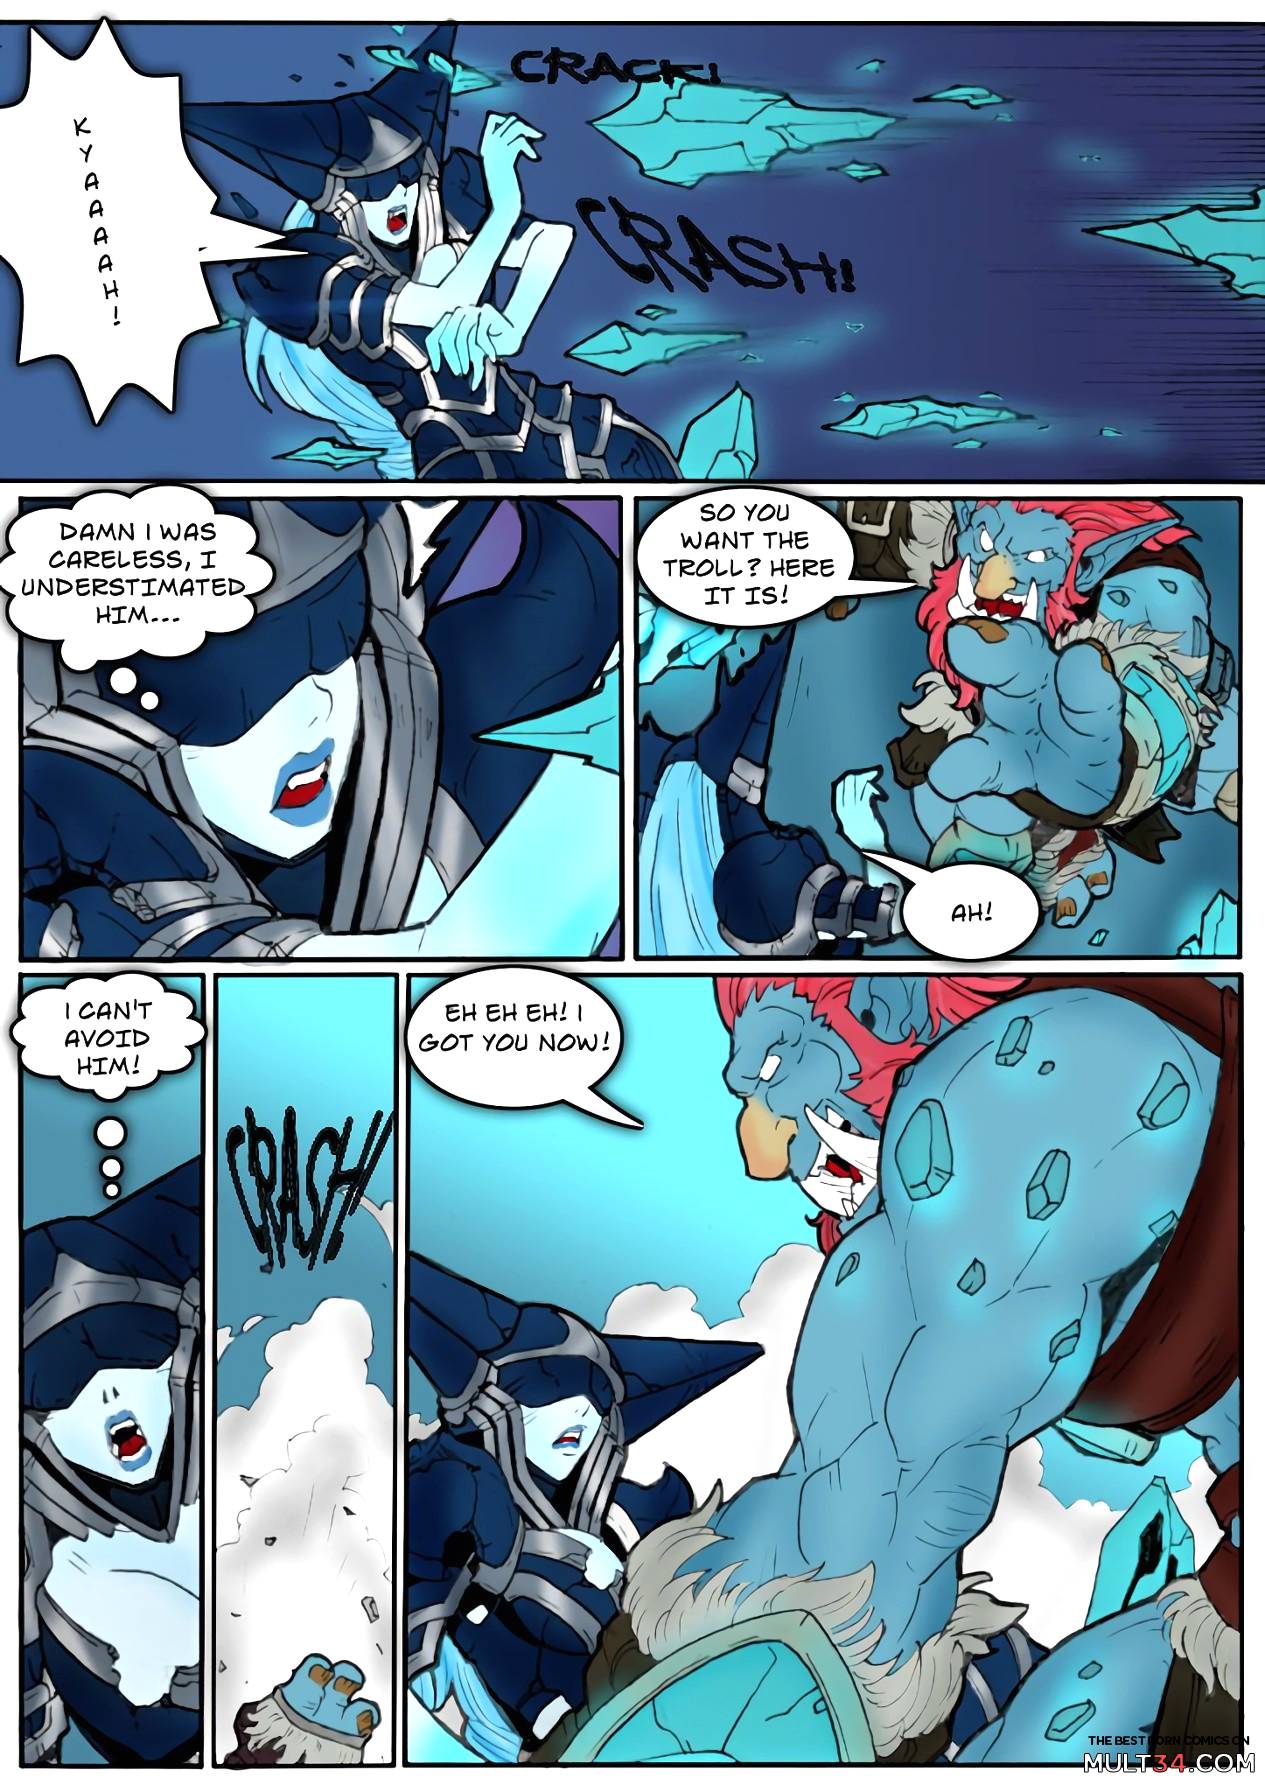 Tales of the Troll King ch. 1 - 3 ] [Colorized] page 5